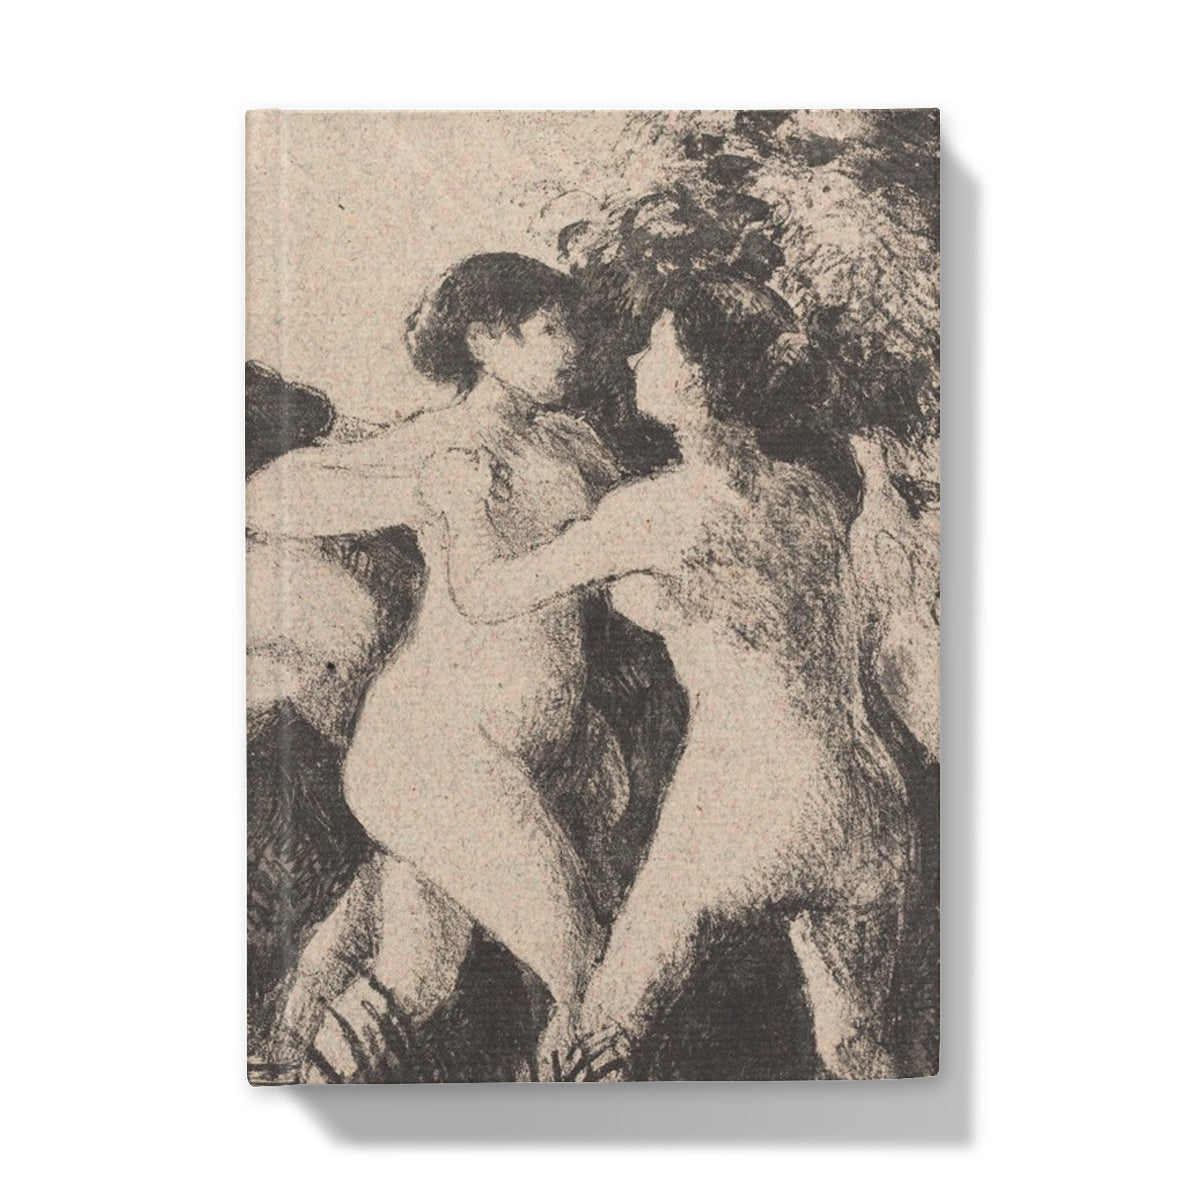 Baigneuses luttant (Bathers Wrestling) by Camille Pissarro, c. 1896 - Hardback Journal